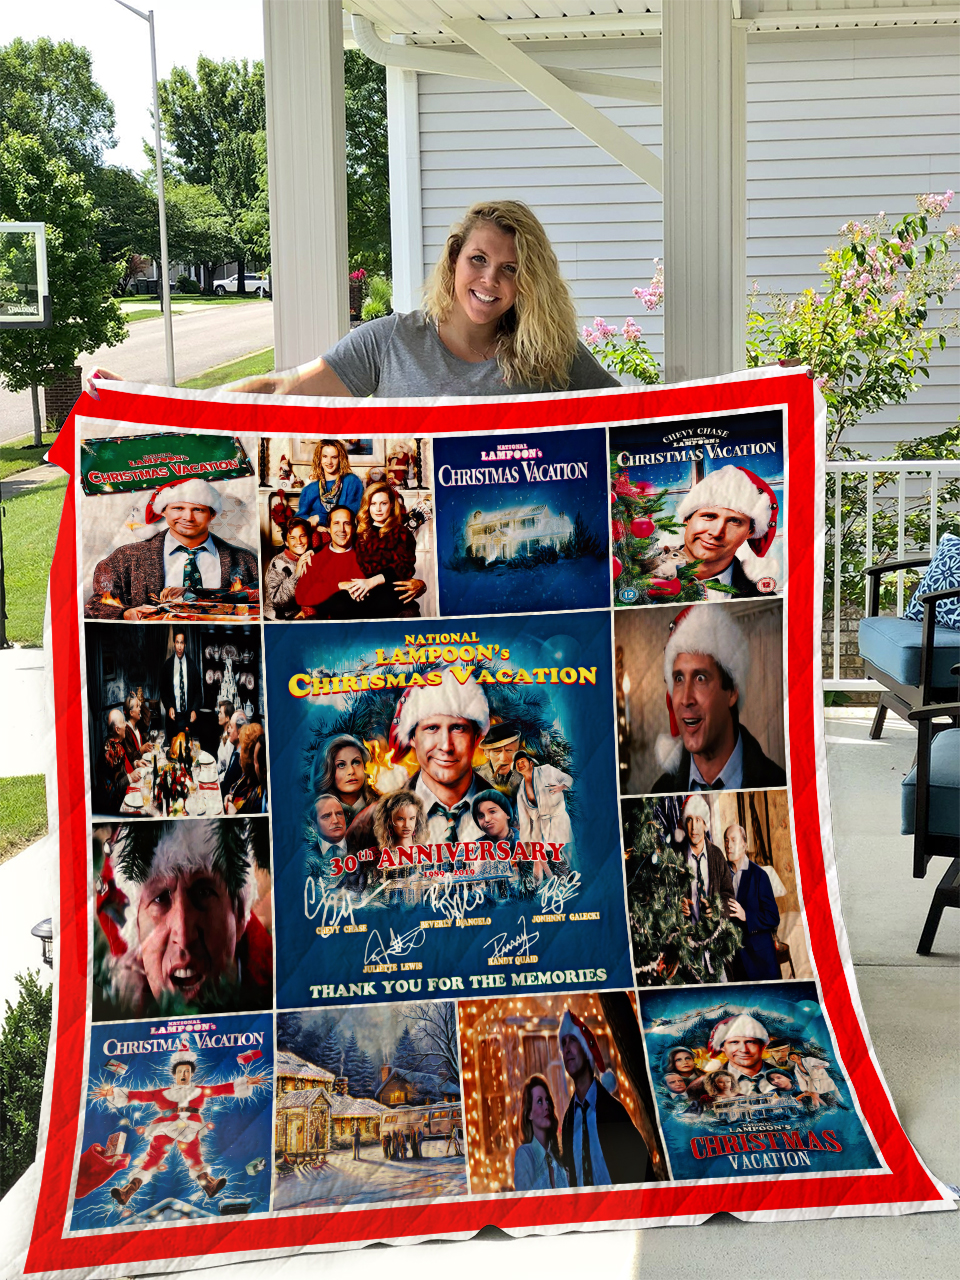 New Chevy Chase Christmas Vacation Afghan Woven Throw Blanket Gift Comedy Movie 